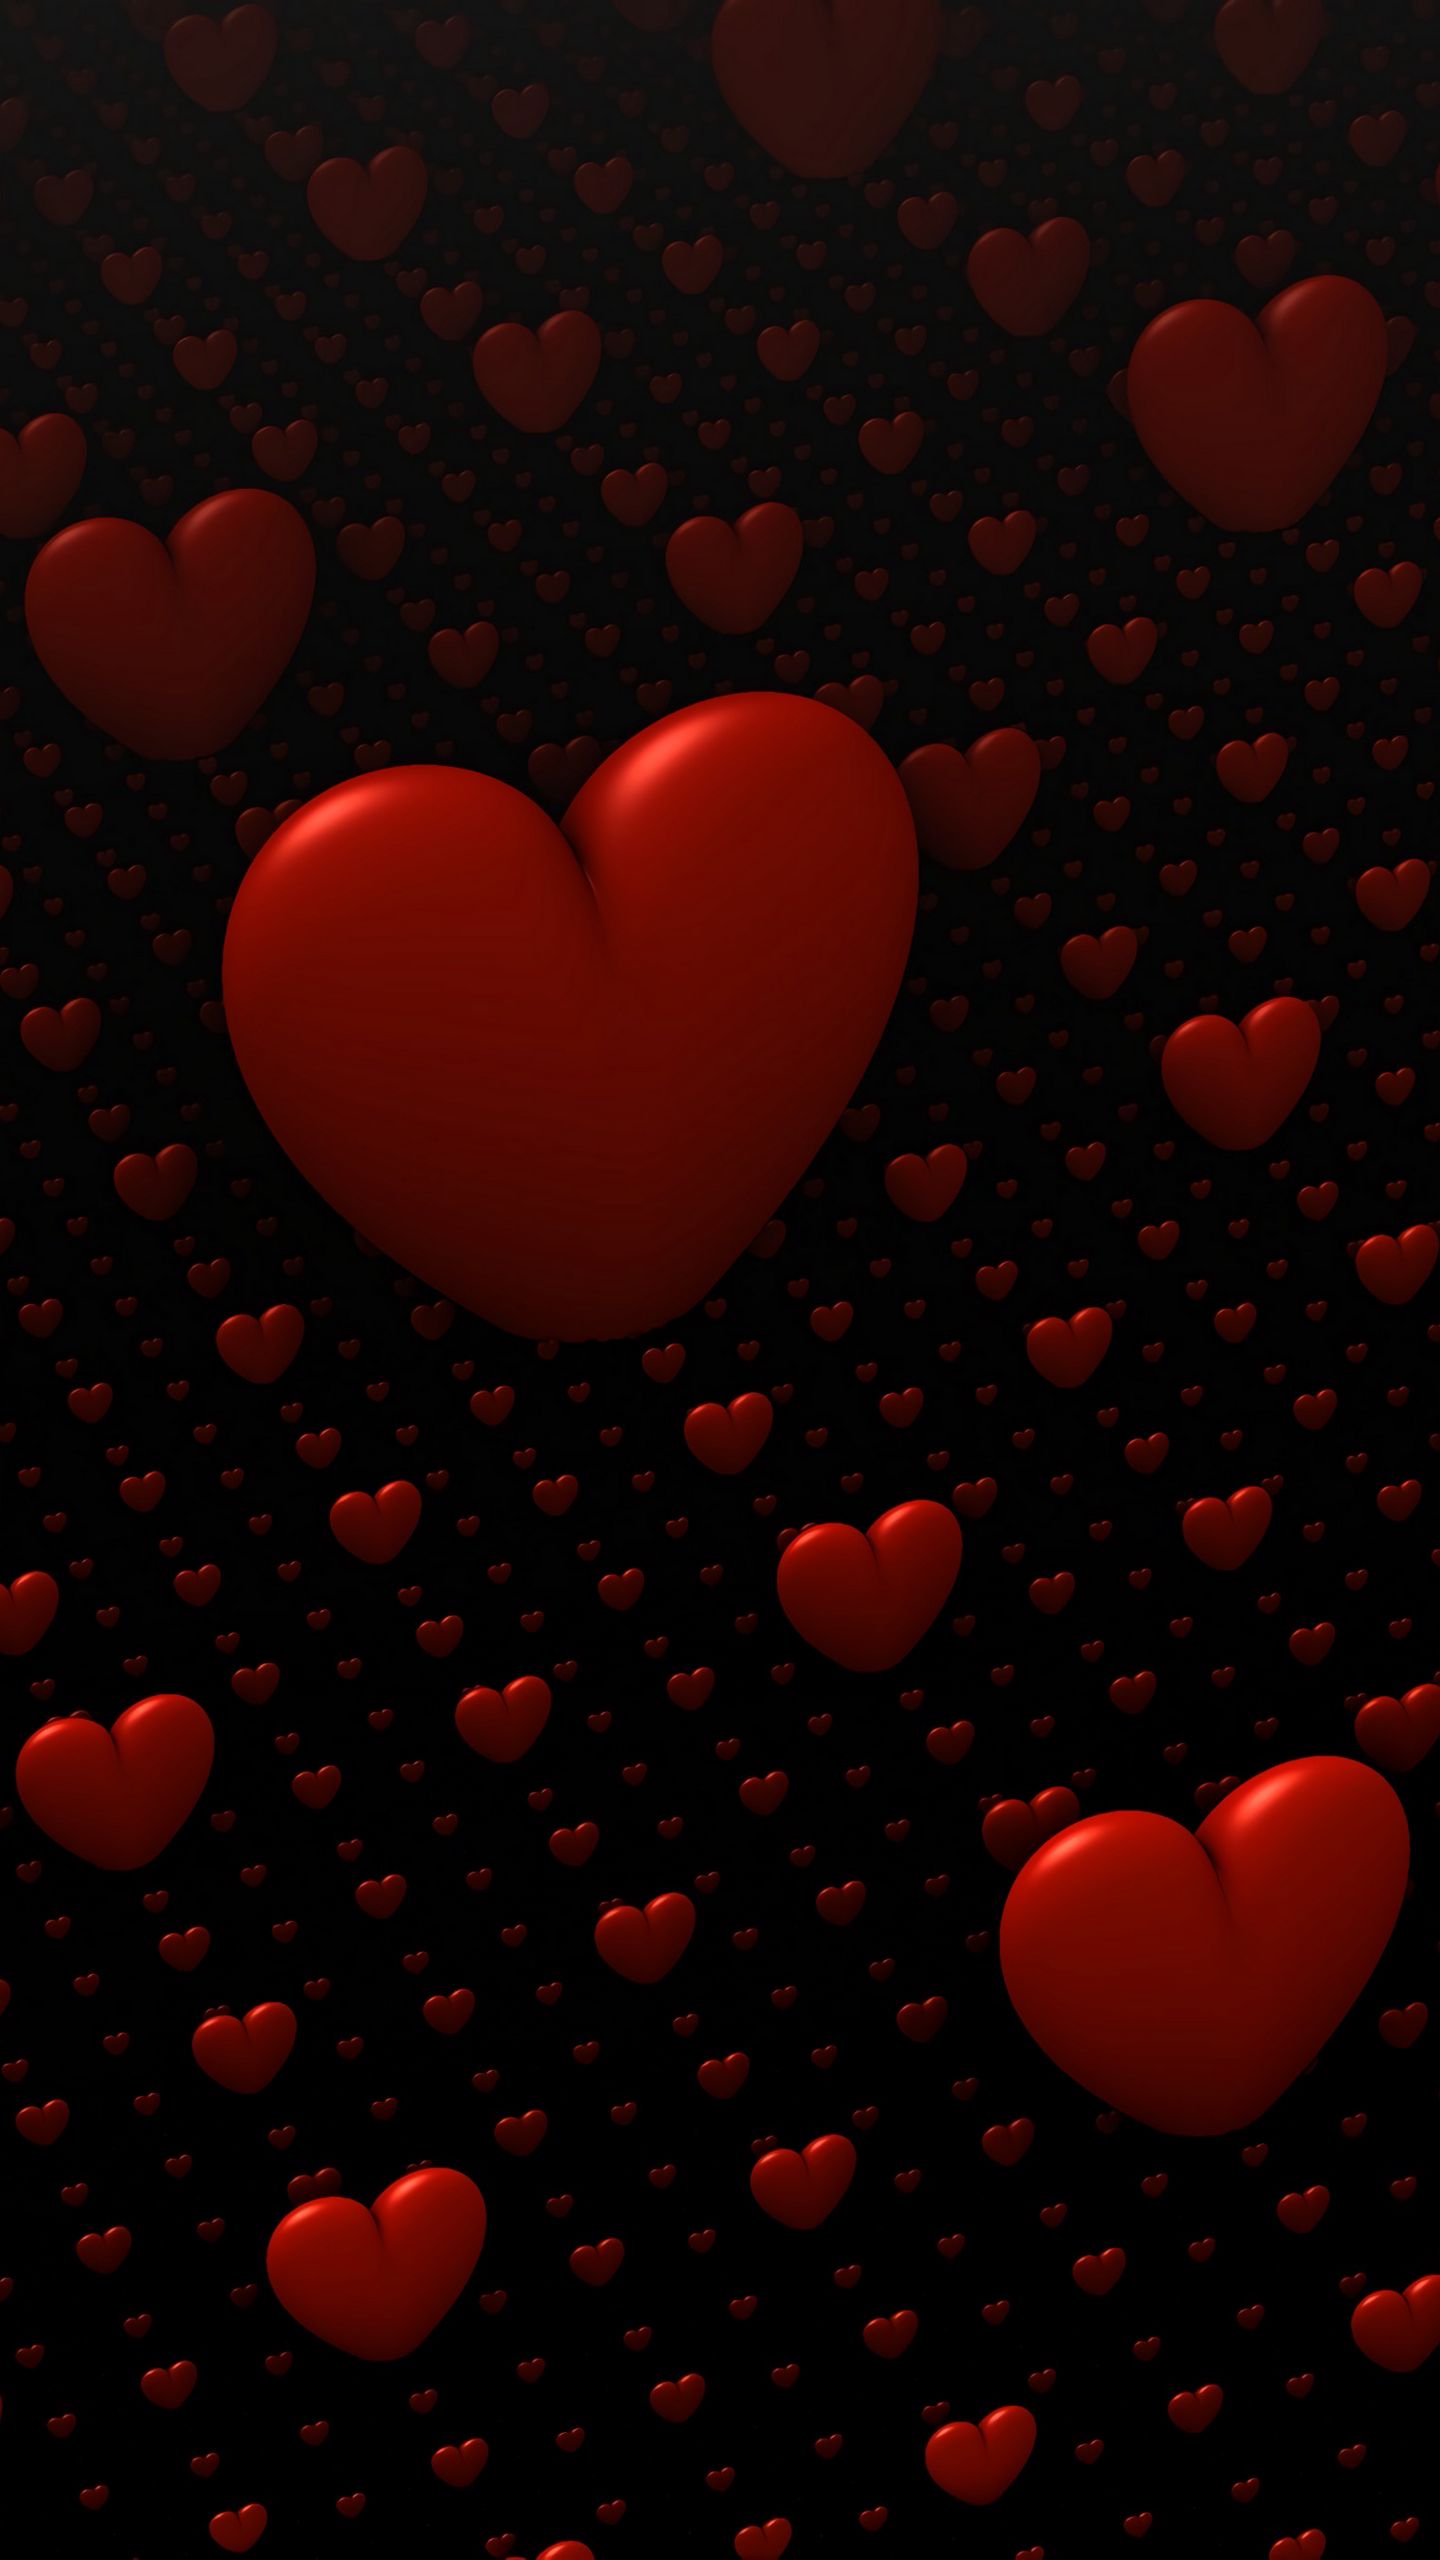 Download wallpaper 1440x2560 hearts, love, 3d, red qhd samsung galaxy s6,  s7, edge, note, lg g4 hd background